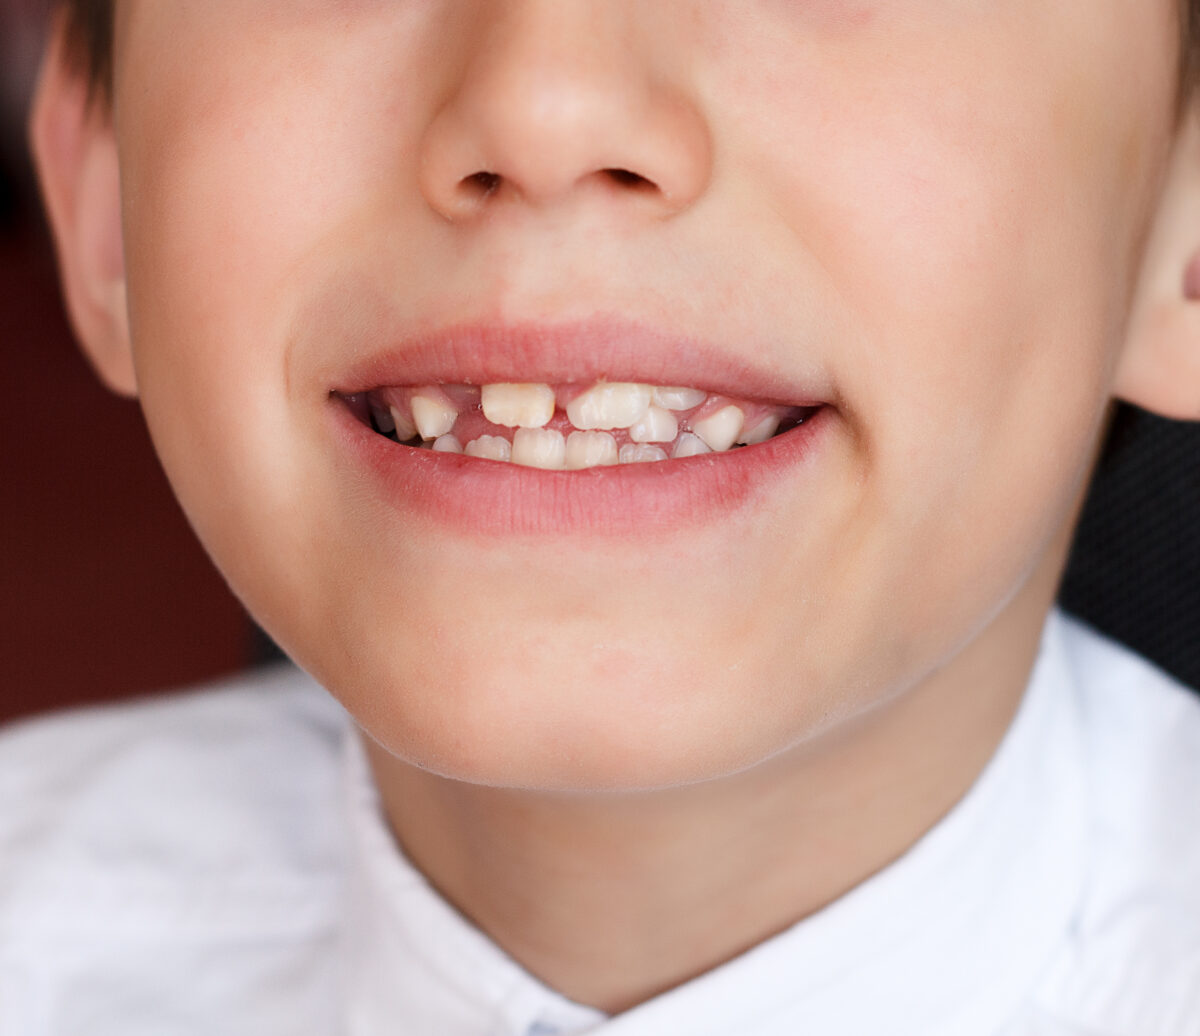 what causes crooked teeth